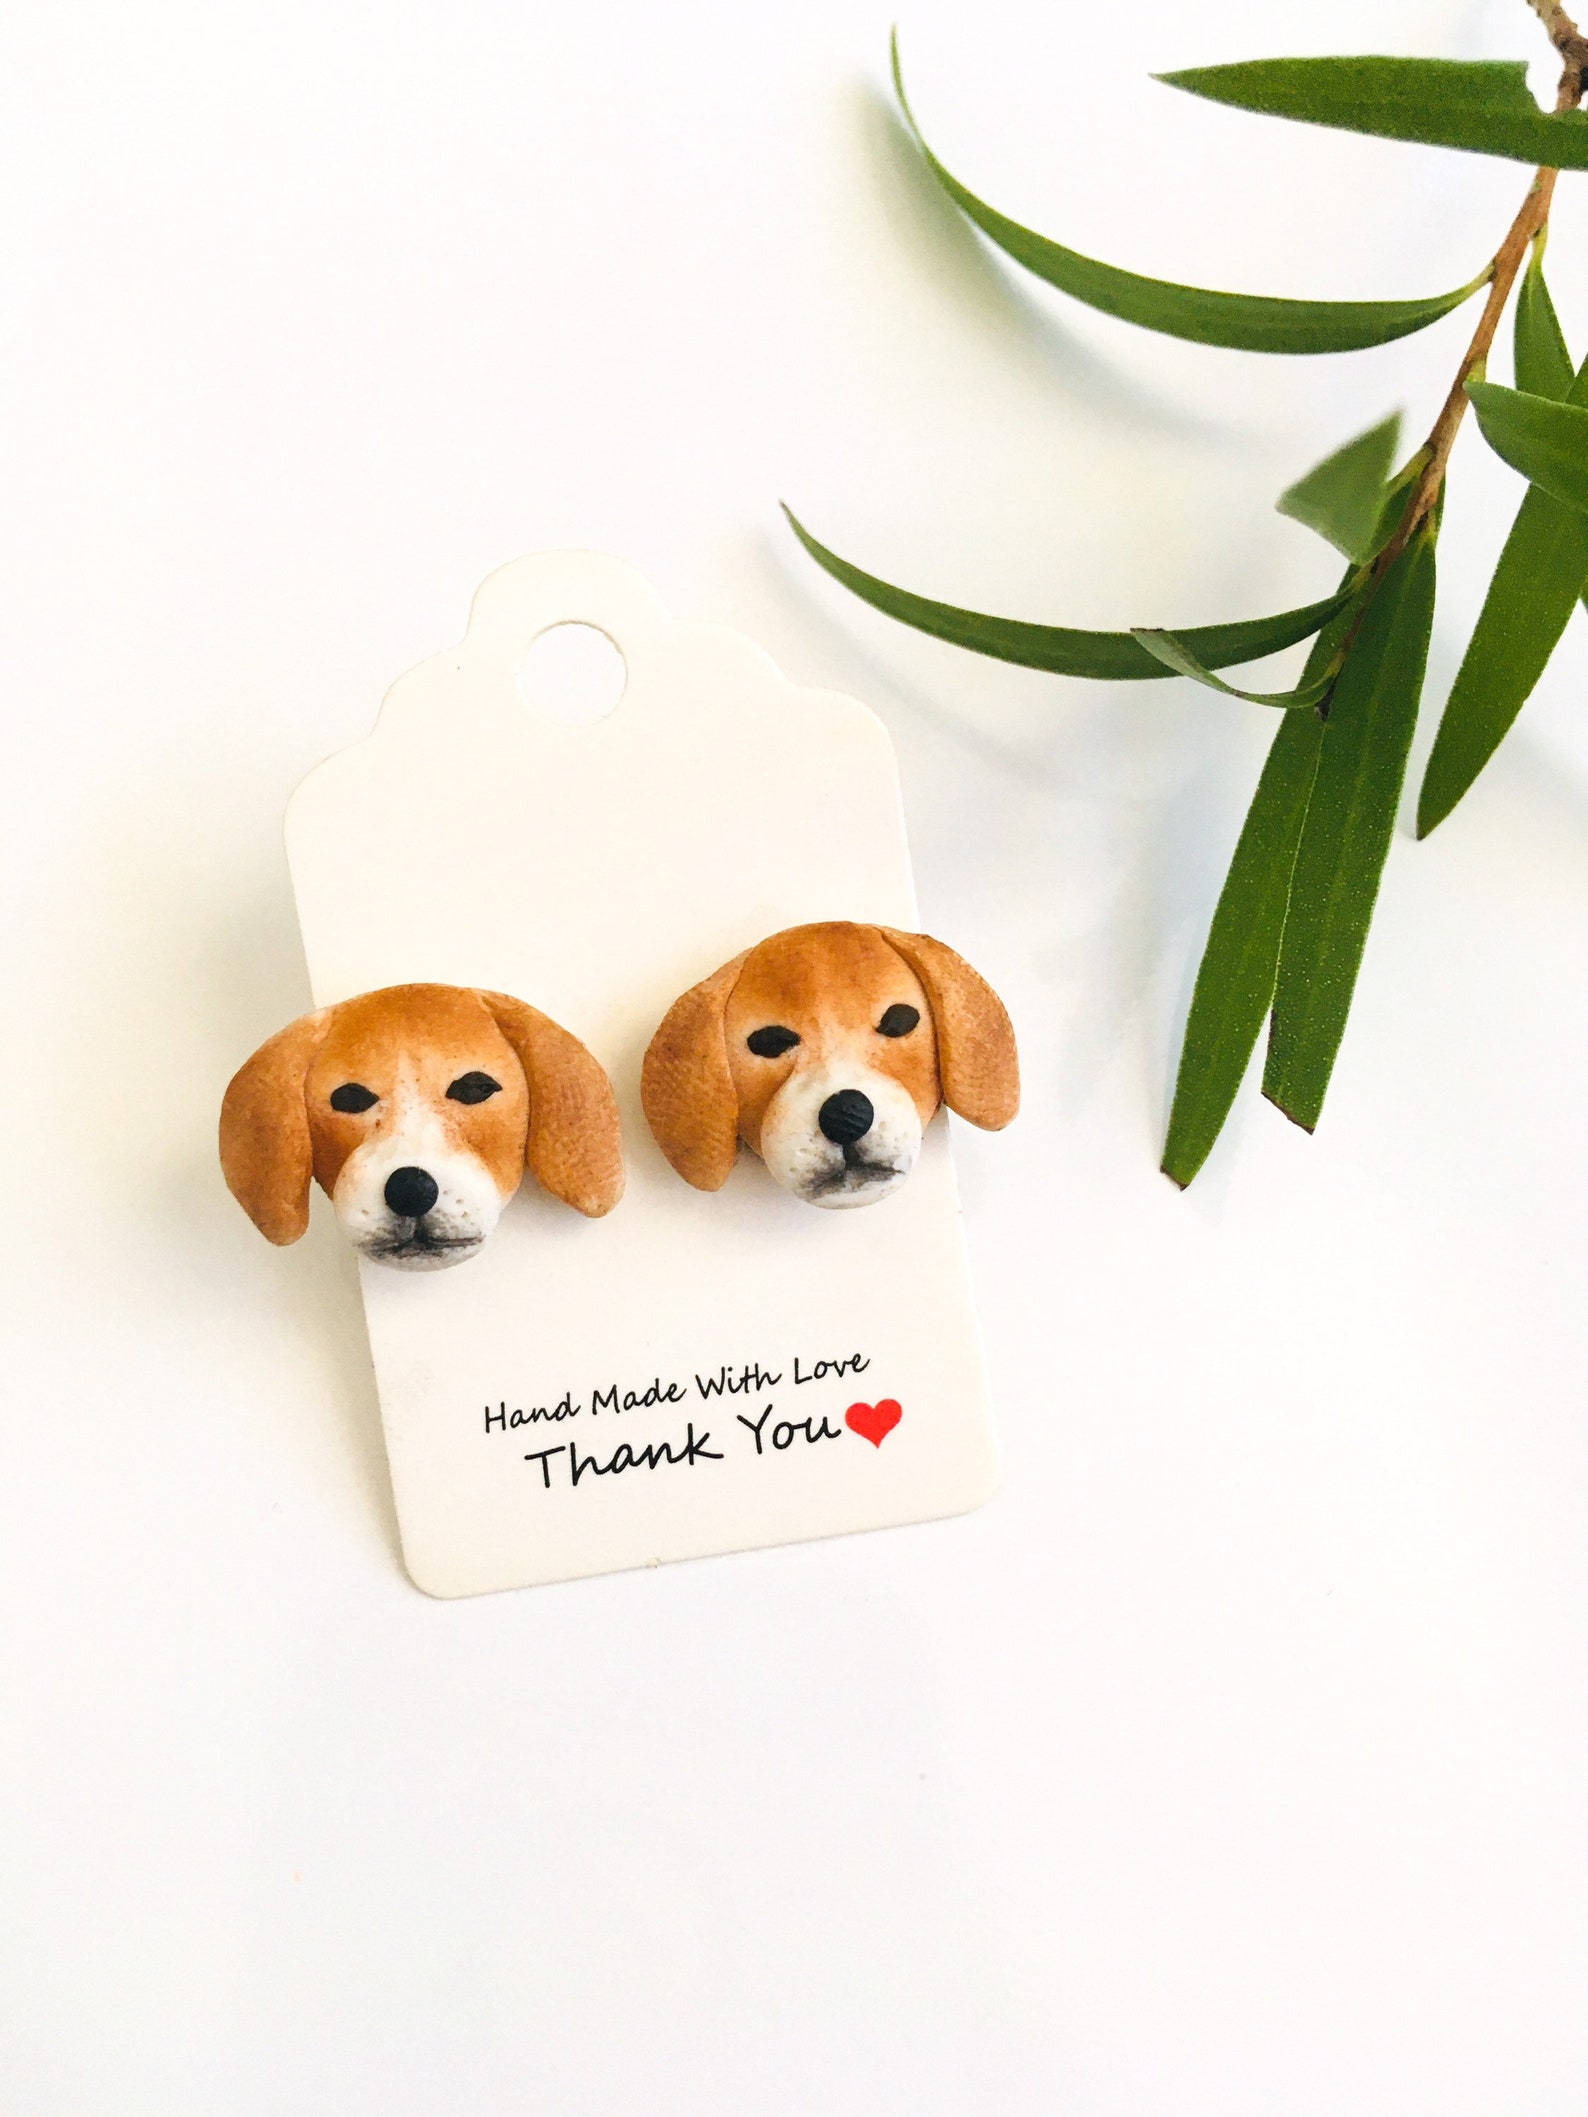 5 Pawsome Beagle Gift Ideas for the Dog Lover in Your Life